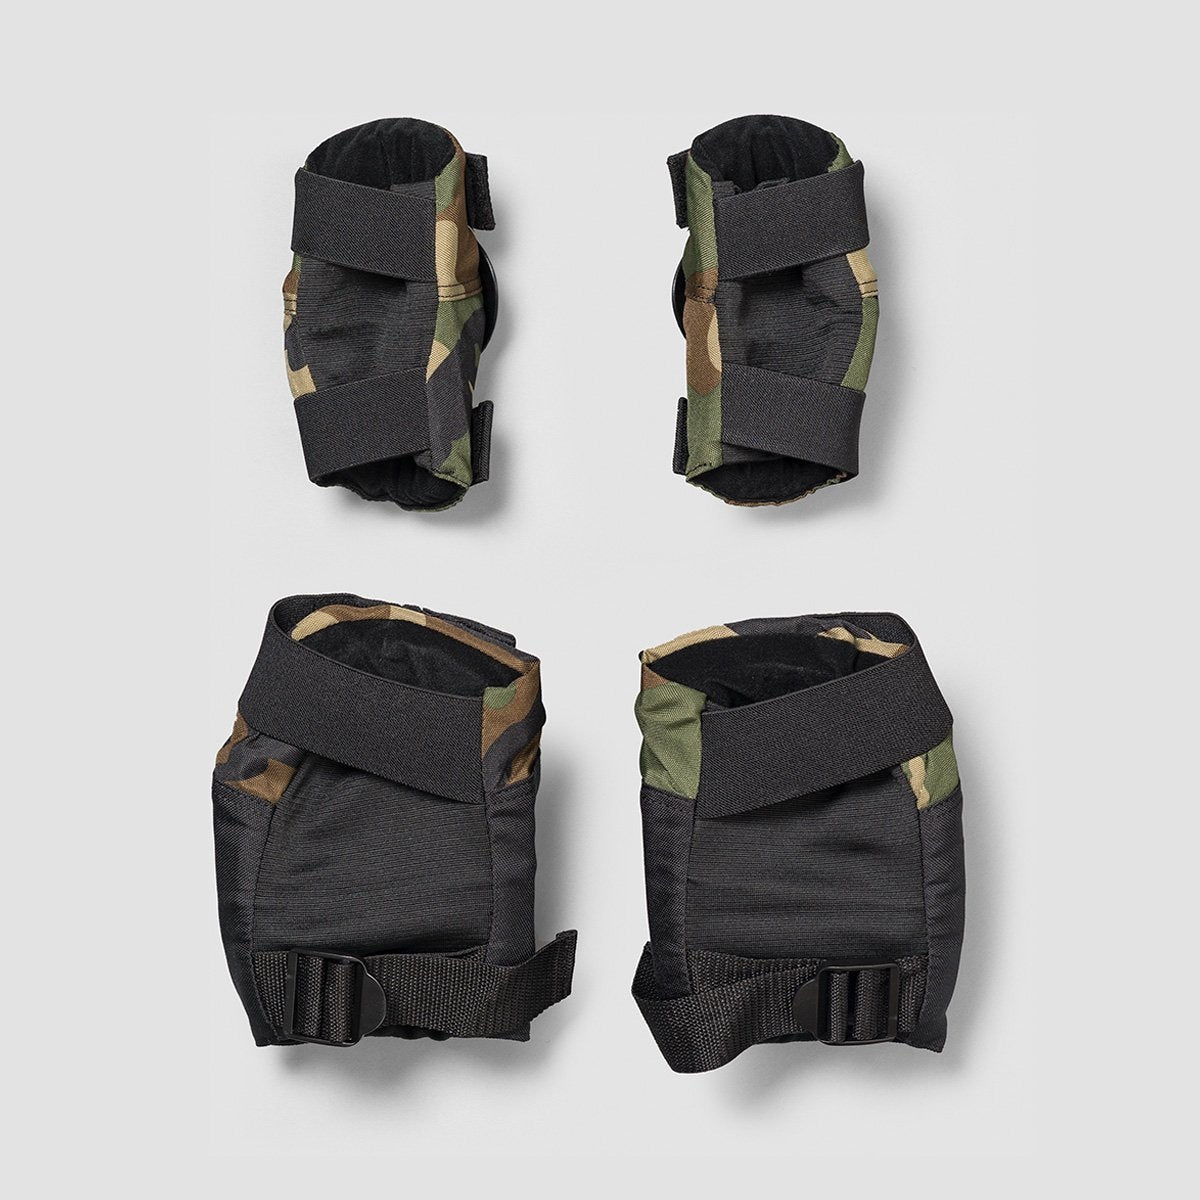 187 Killer Pads Knee & Elbow Combo Pack Camo - Safety Gear